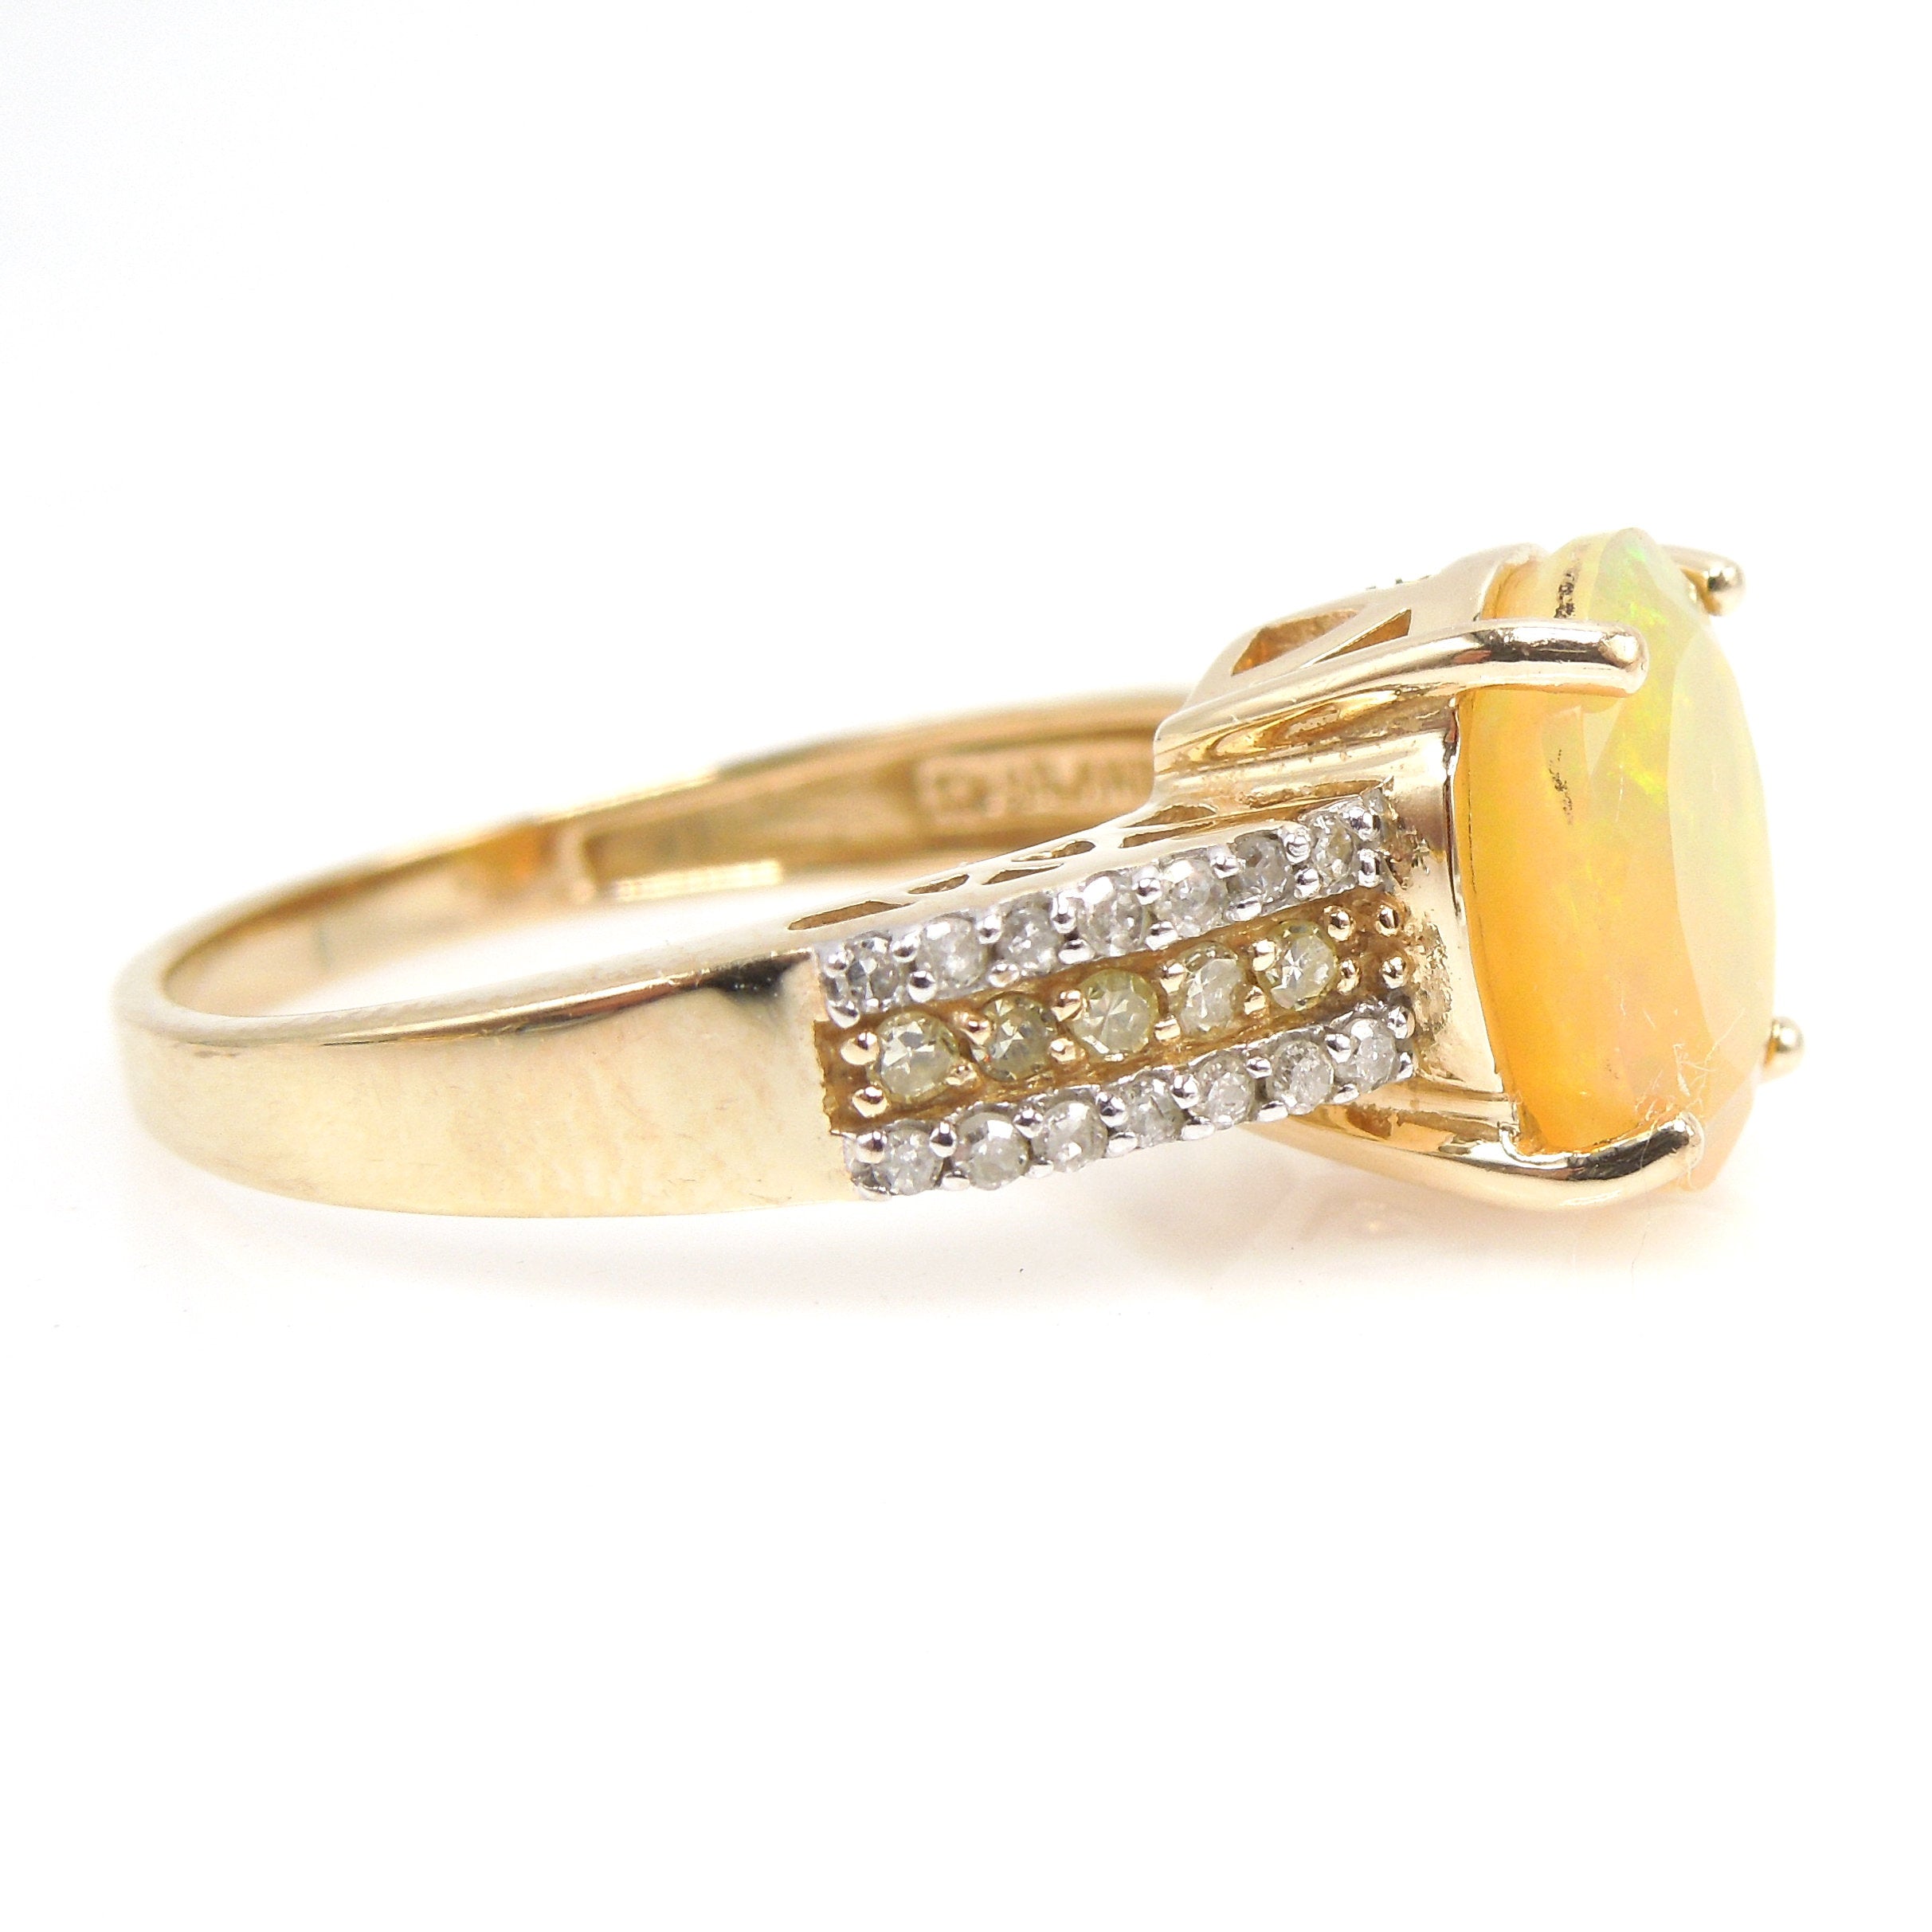 Faceted Fiery Gray Crystal Opal Ring with White Diamonds and Yellow Diamonds in Yellow Gold